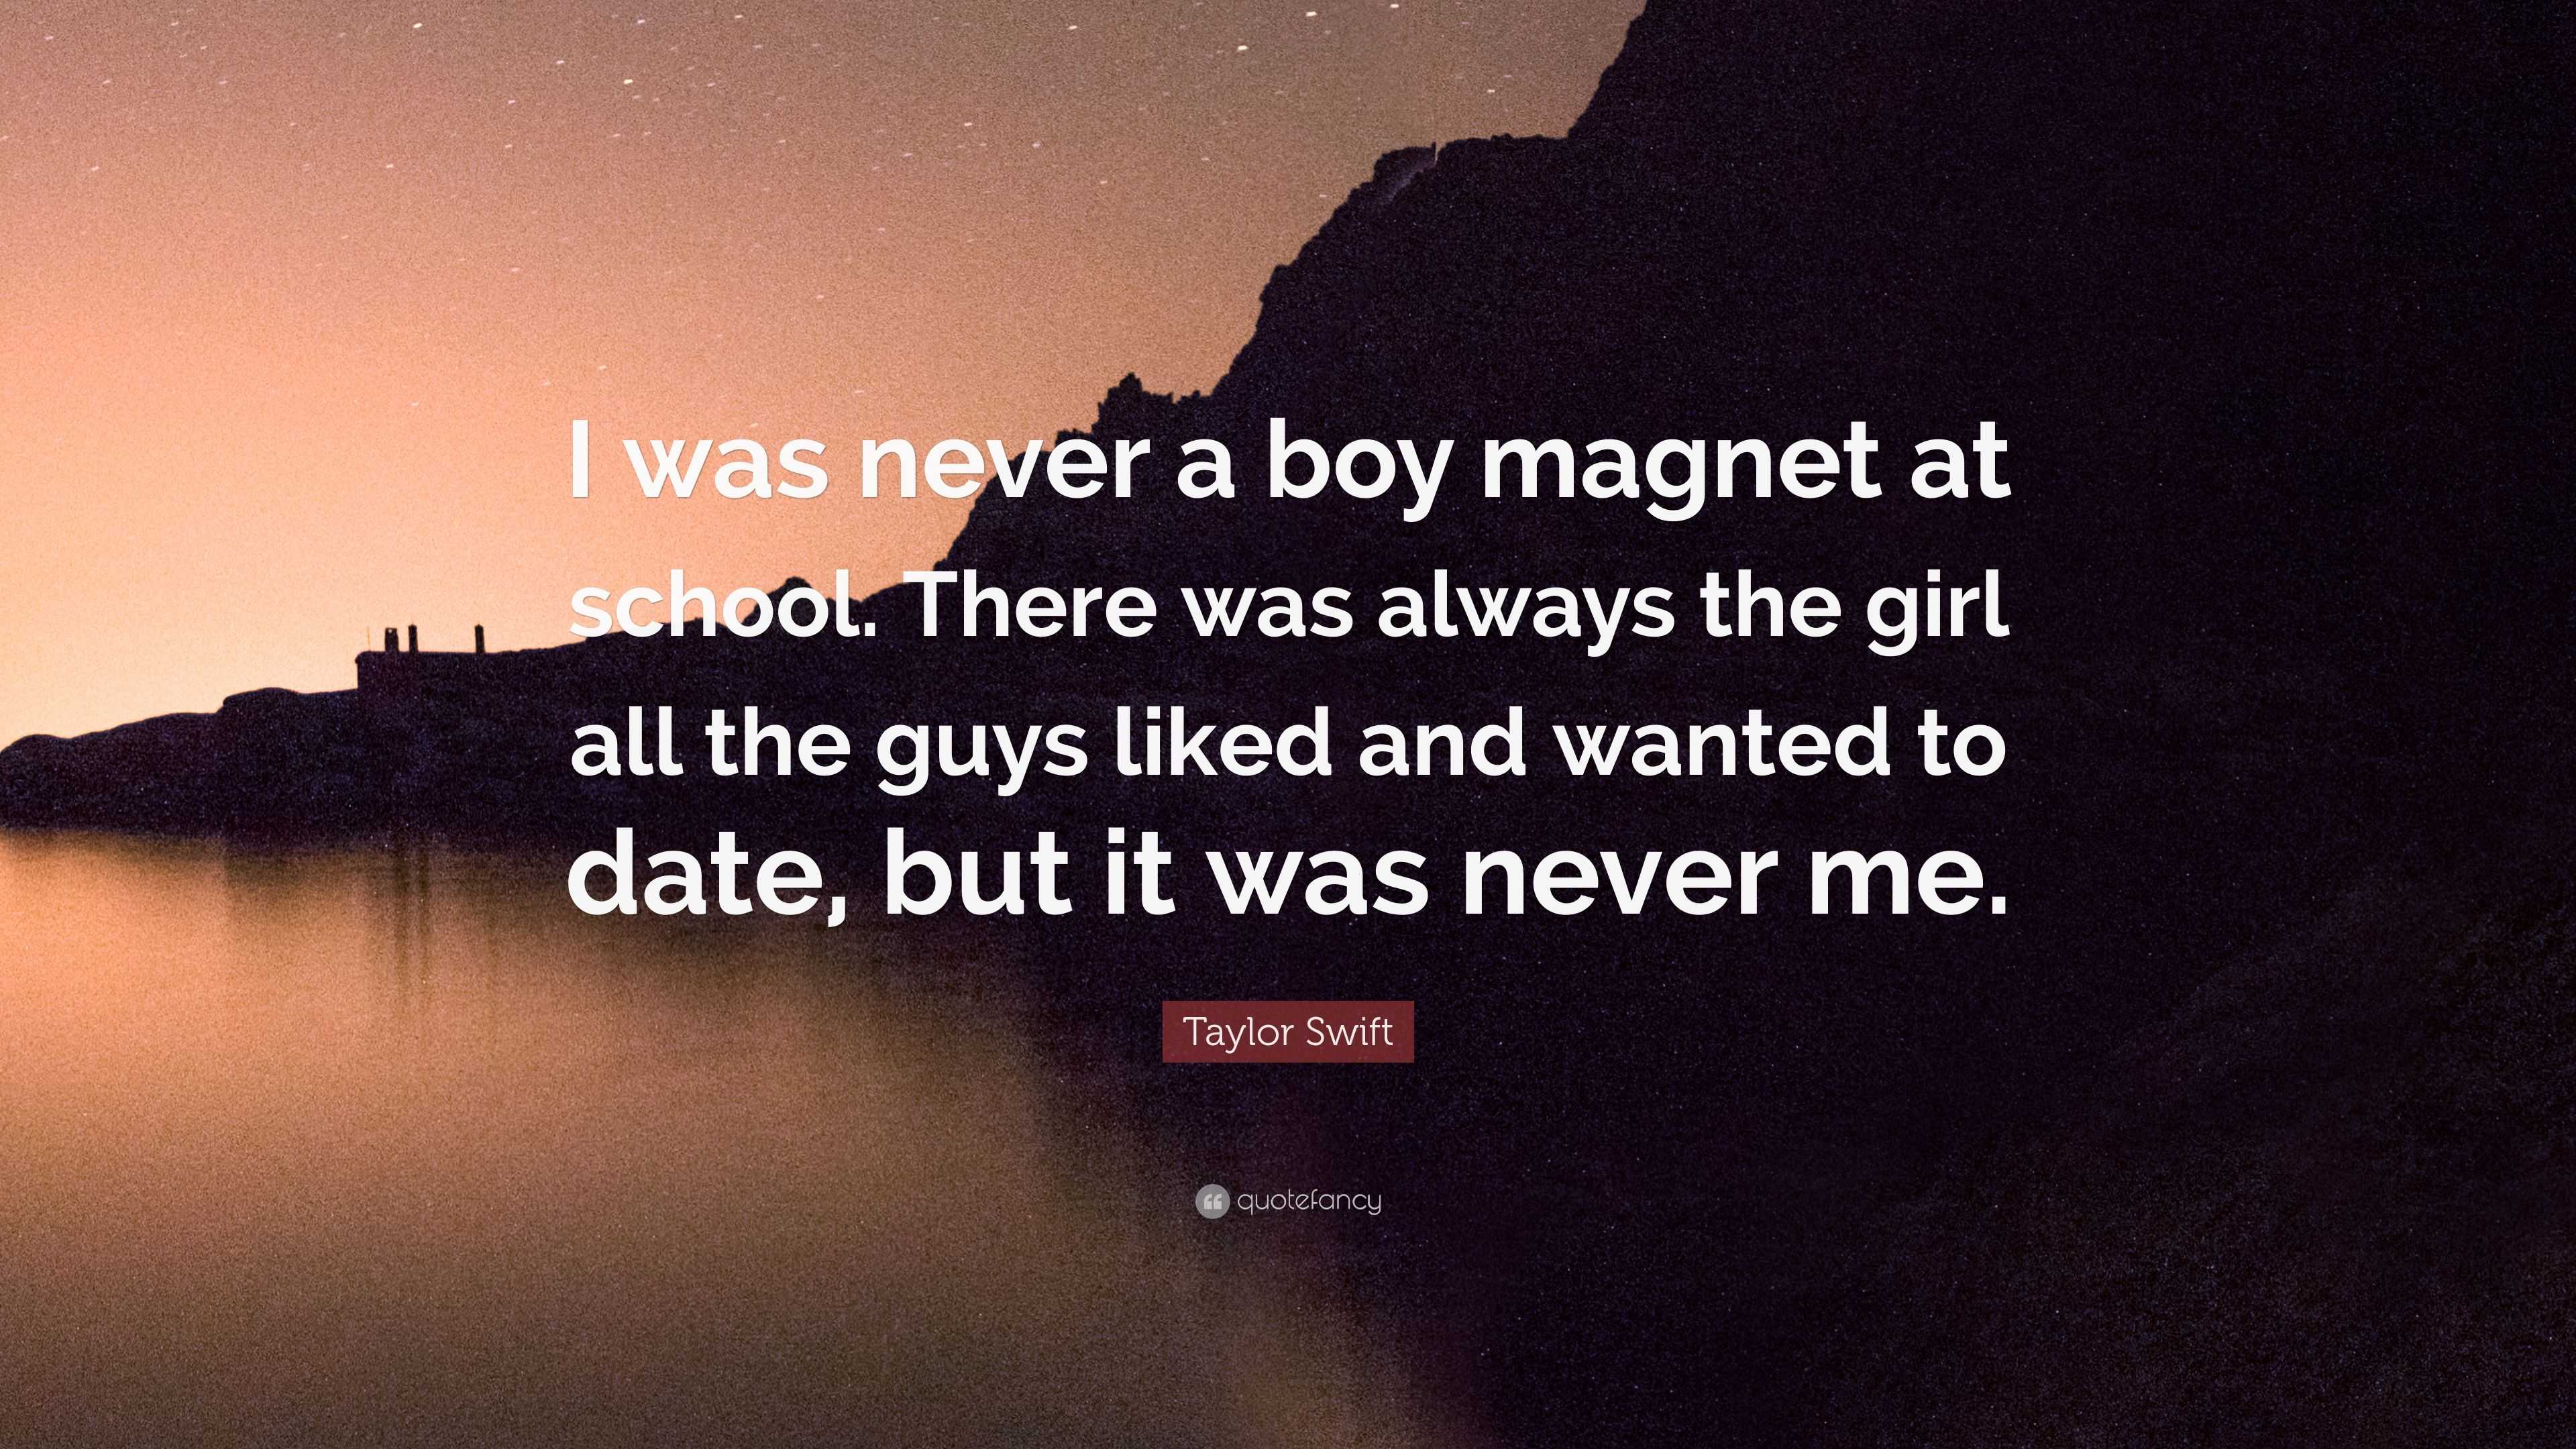 Taylor Swift Quote: “I was never a boy magnet at school. There was